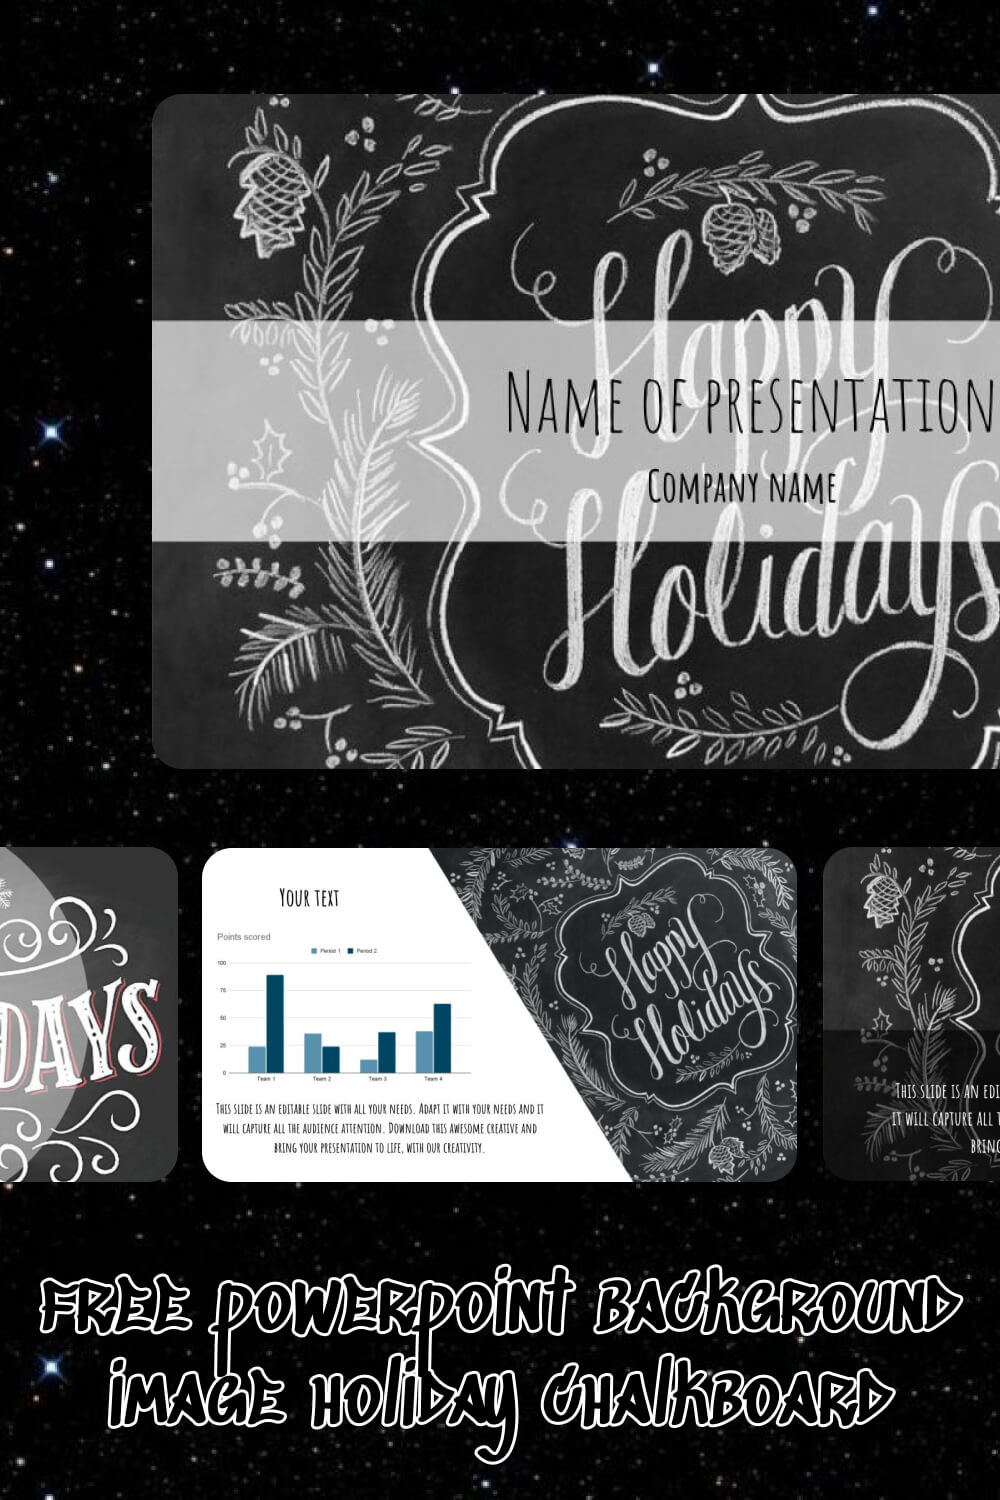 free powerpoint background image holiday chalkboard 3